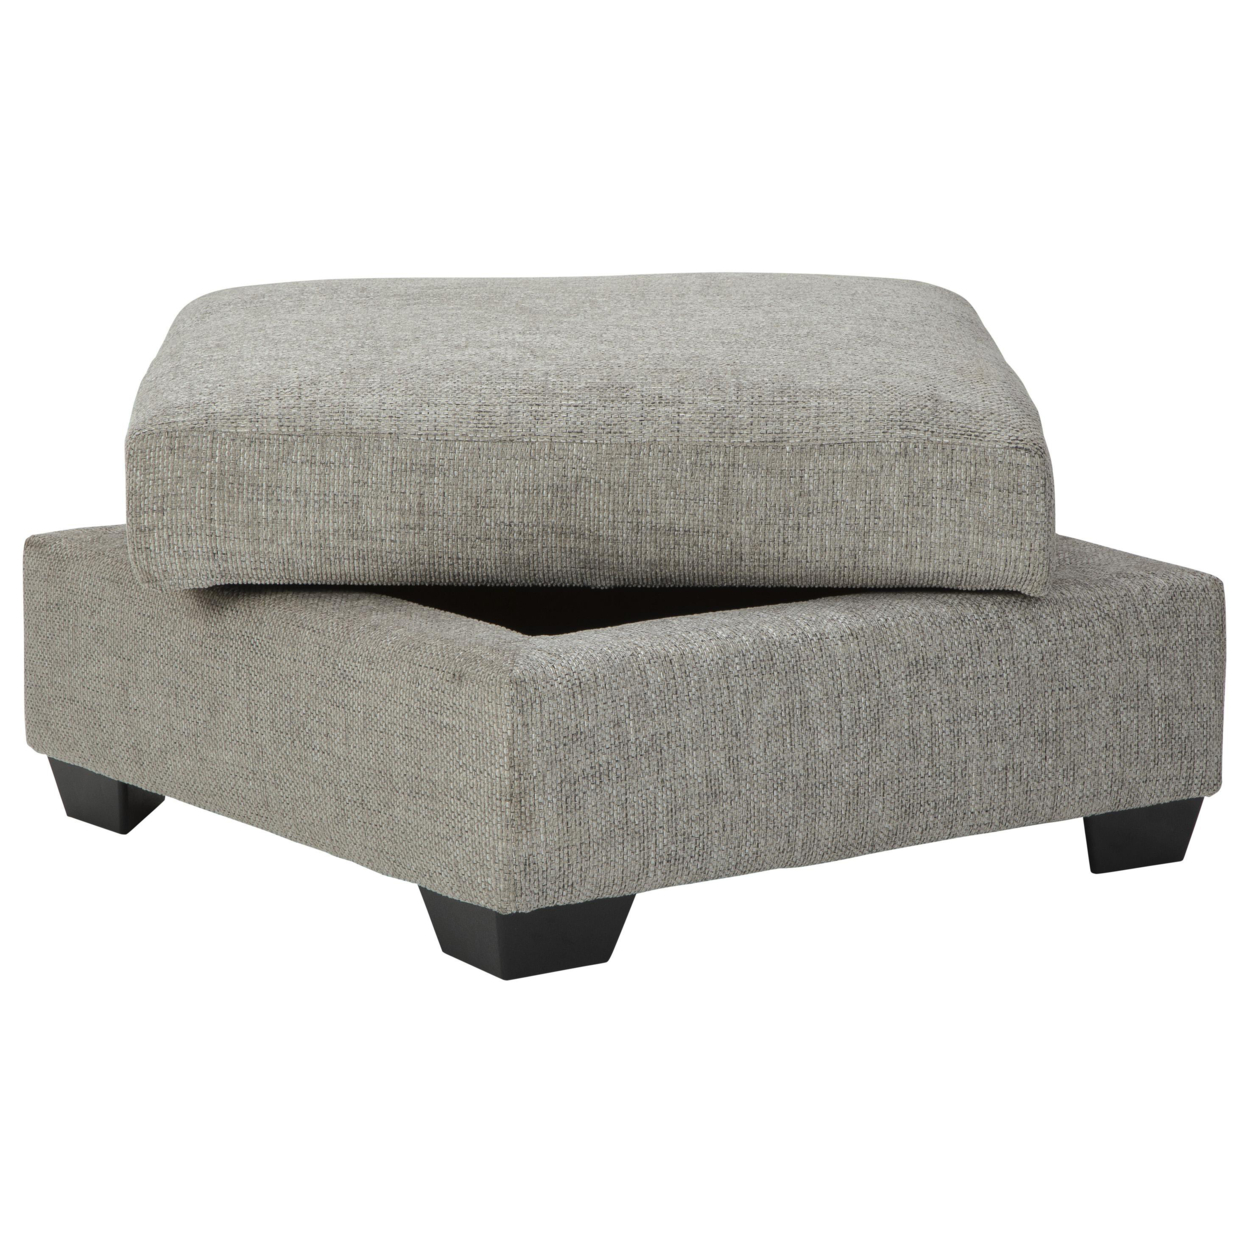 Wooden Ottoman With Textured Polyester Upholstery And Storage, Light Gray- Saltoro Sherpi